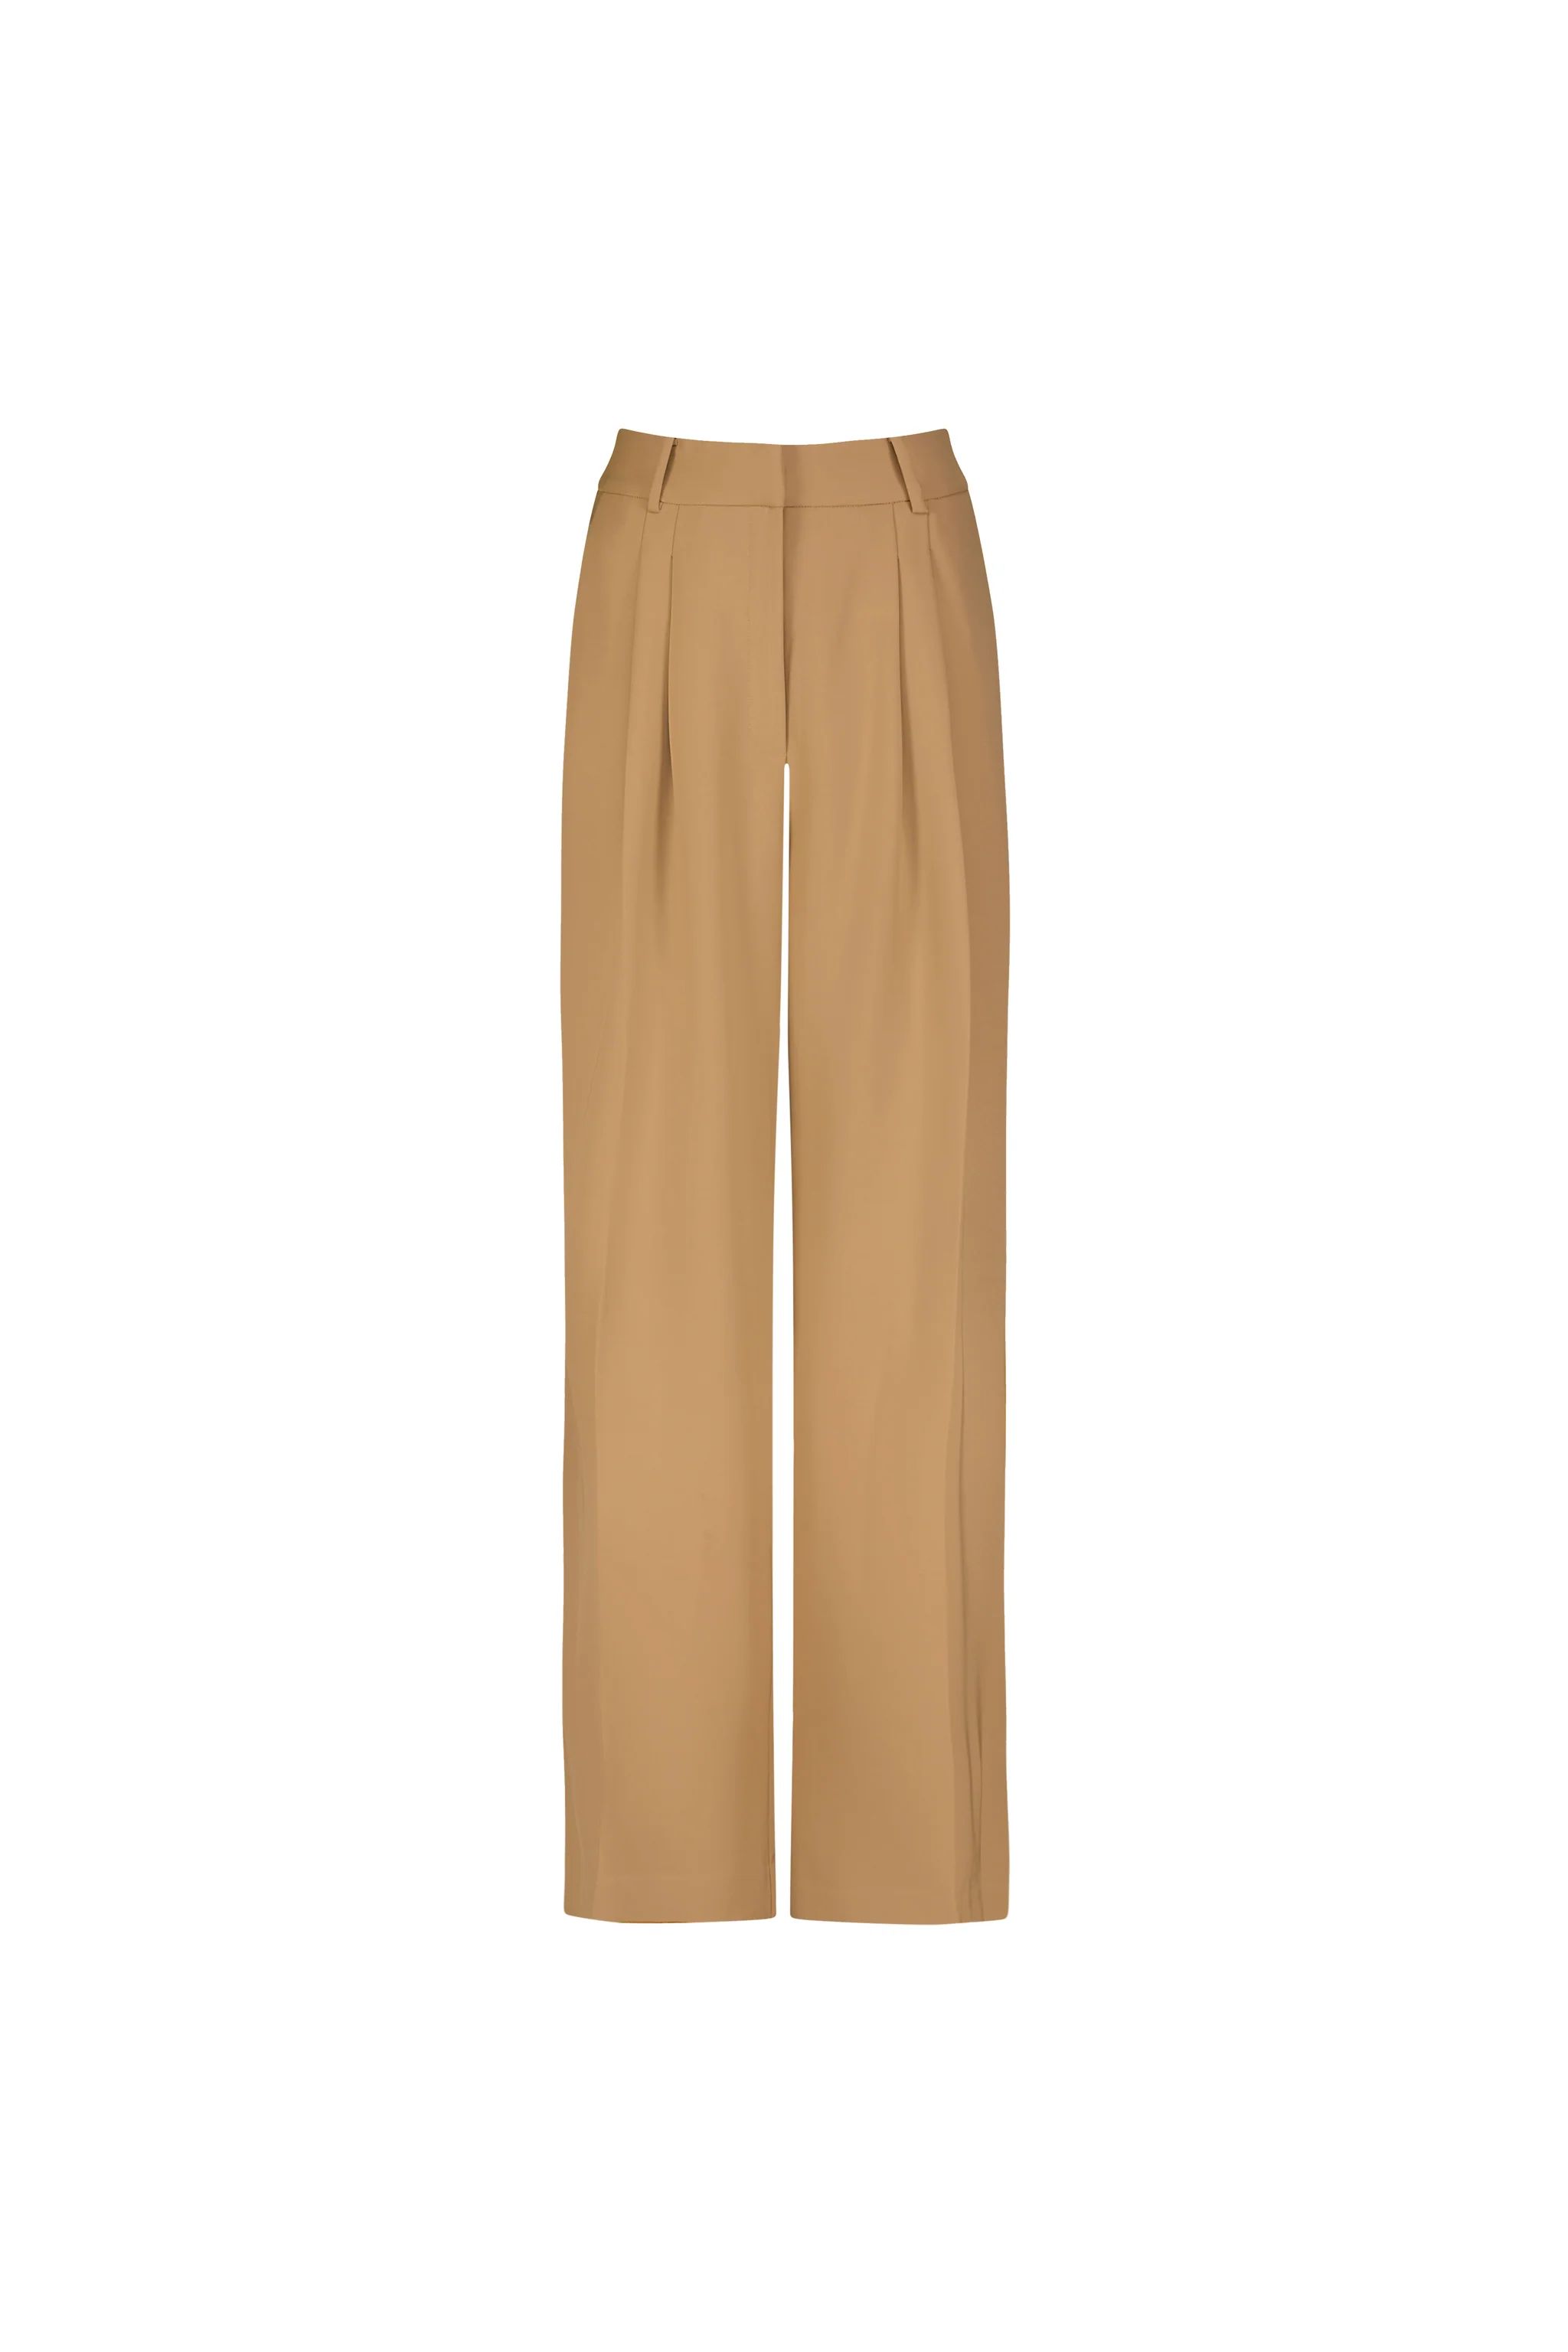 Camel Twill Wide Leg Trouser Pant | MAYSON the label